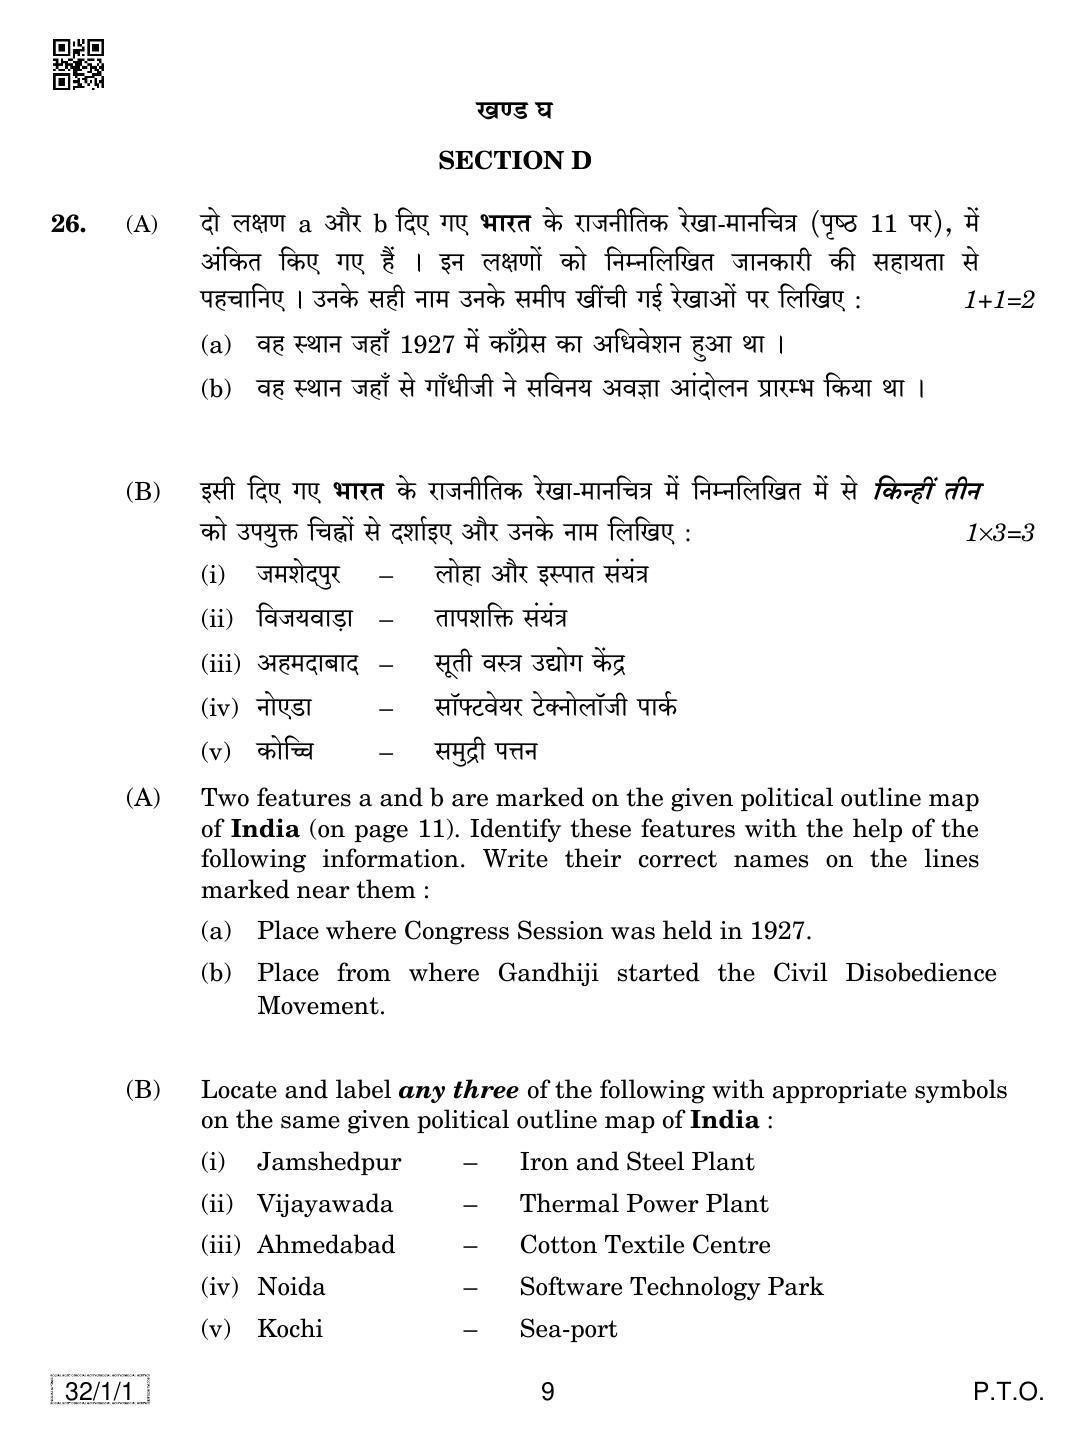 CBSE Class 10 32-1-1 SOCIAL SCIENCE 2019 Compartment Question Paper - Page 9